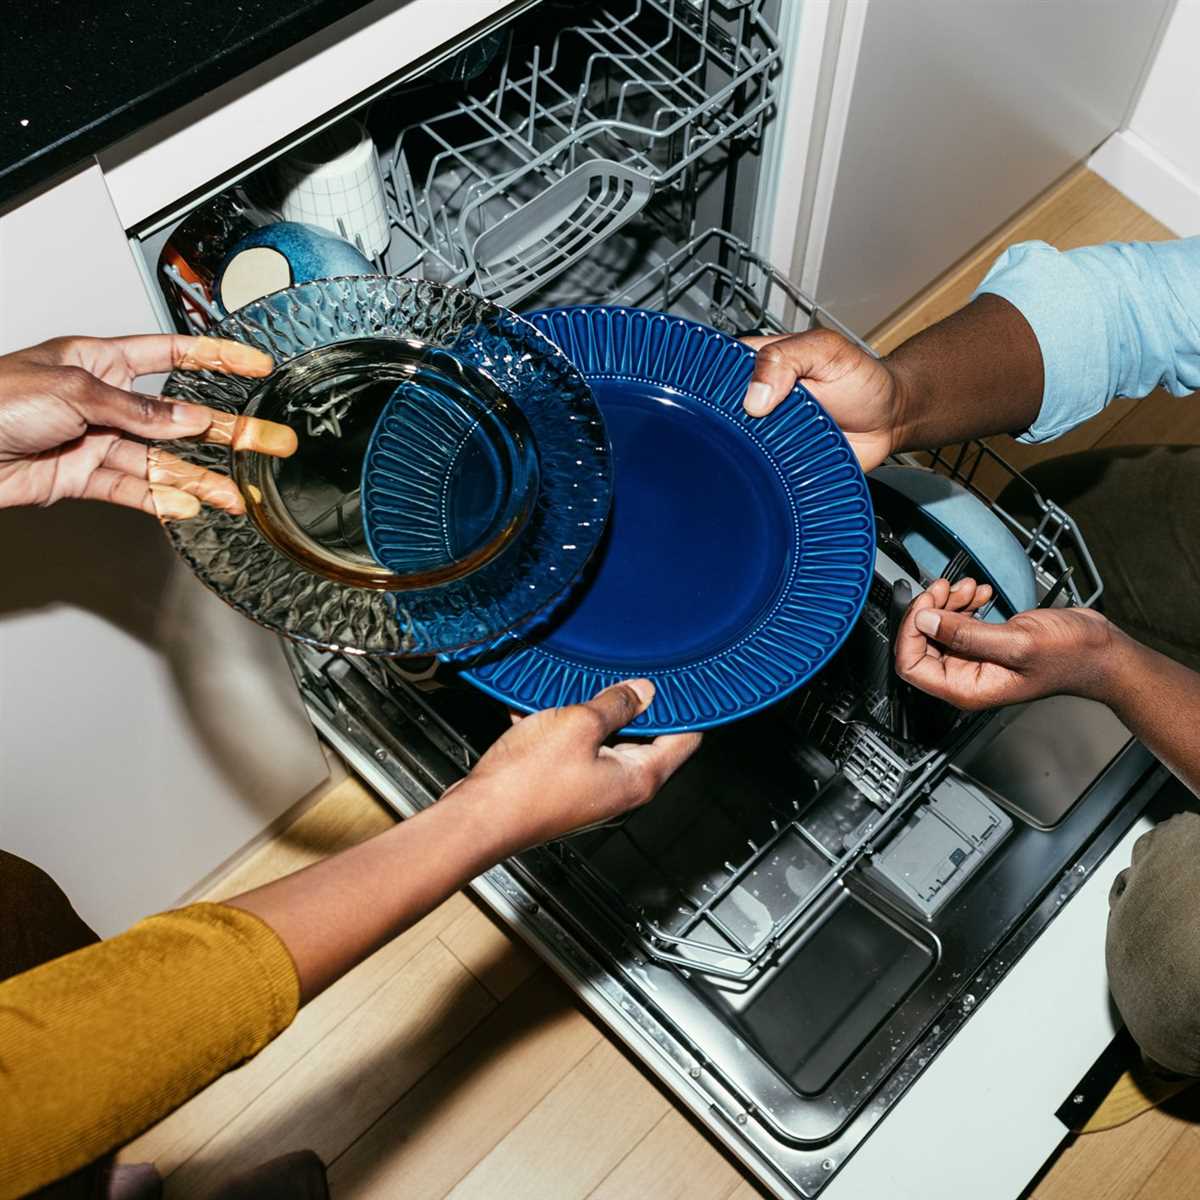 Tips for efficient dishwashing with a three drawer dishwasher